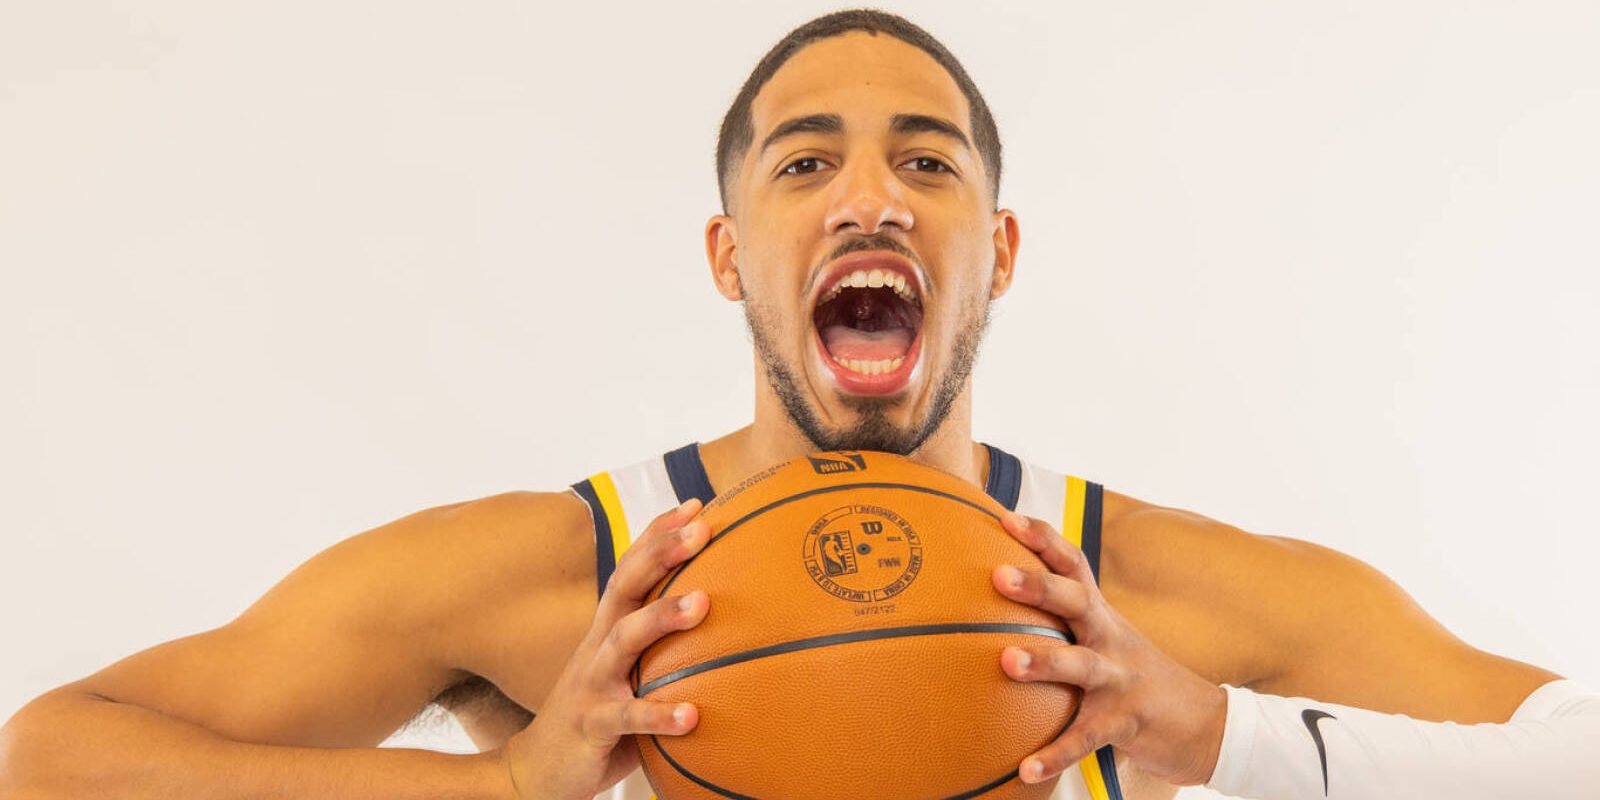 Oct 2, 2023; Indianapolis, IN, USA; Indiana Pacers guard Tyrese Haliburton (0) poses for a photo during the Indiana Pacers media day. Mandatory Credit: Trevor Ruszkowski-USA TODAY Sports